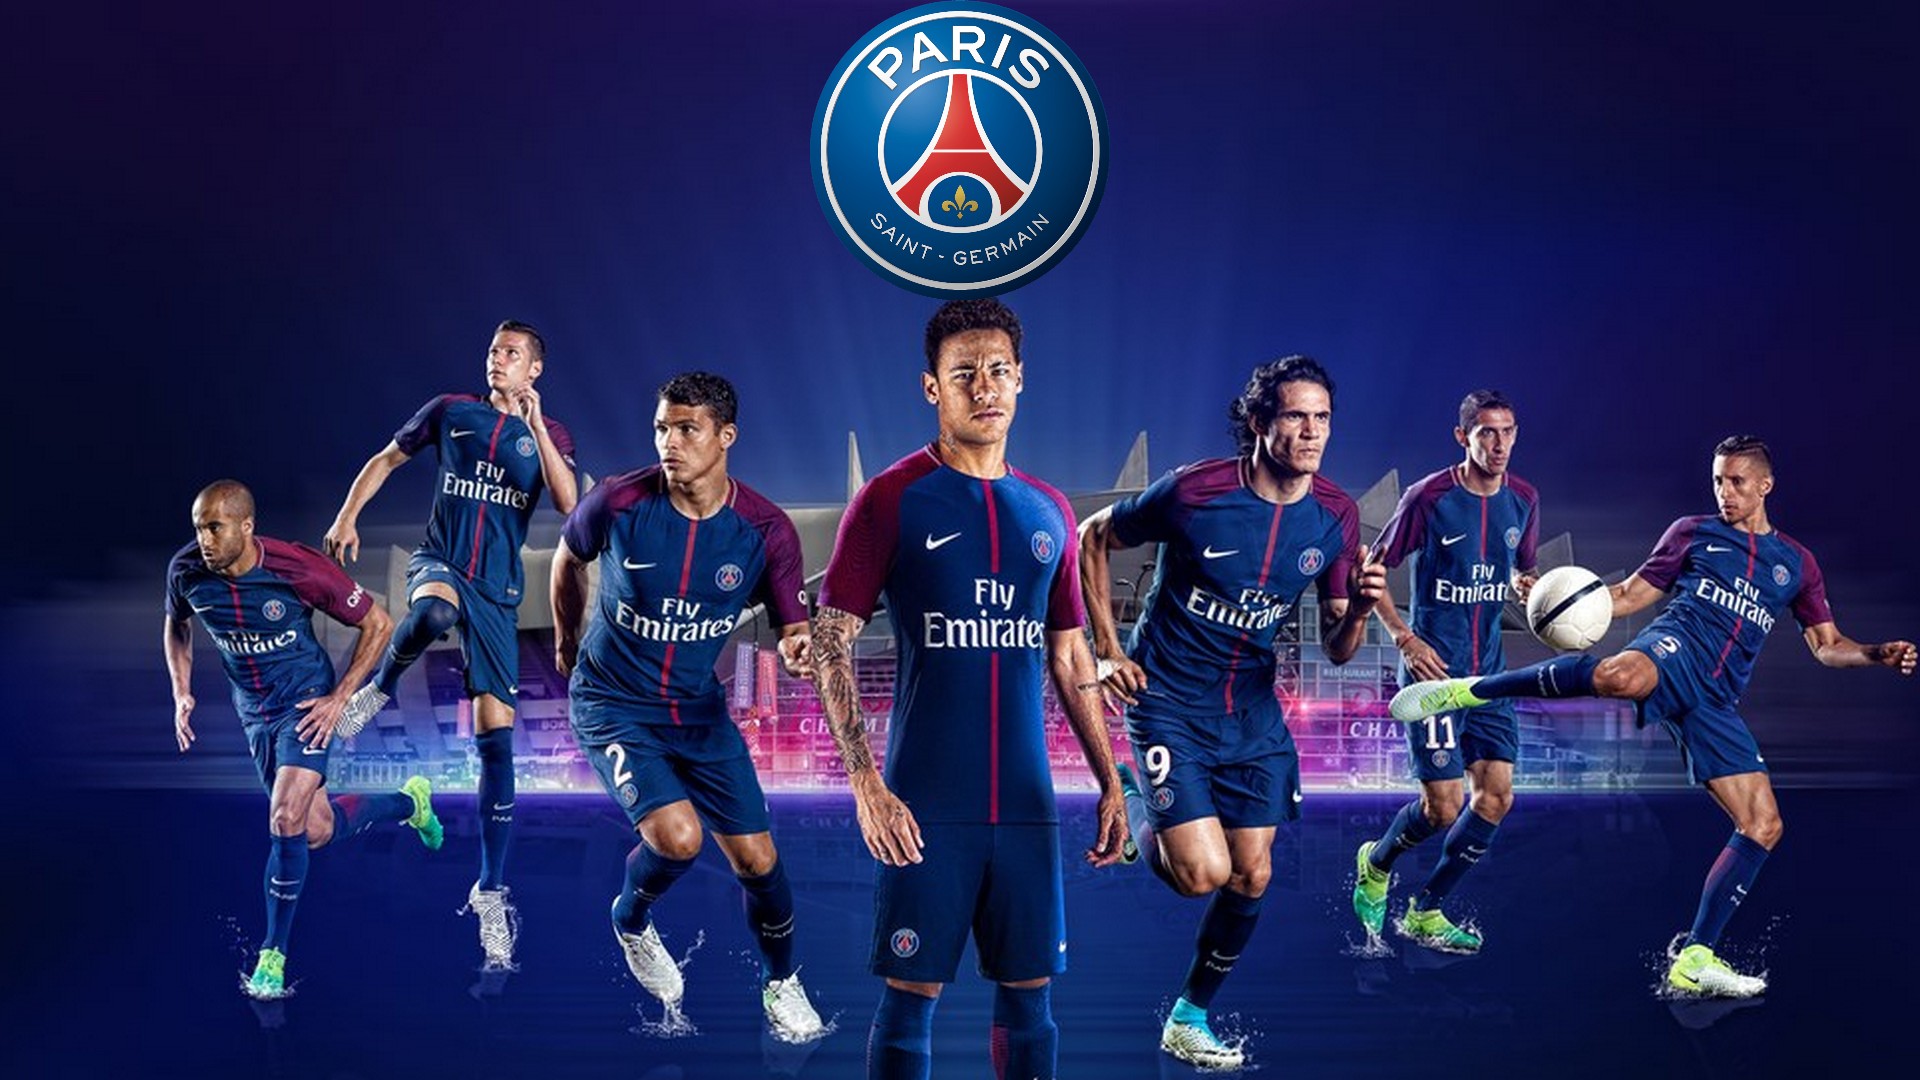 Wallpapers PSG with resolution 1920x1080 pixel. You can make this wallpaper for your Mac or Windows Desktop Background, iPhone, Android or Tablet and another Smartphone device